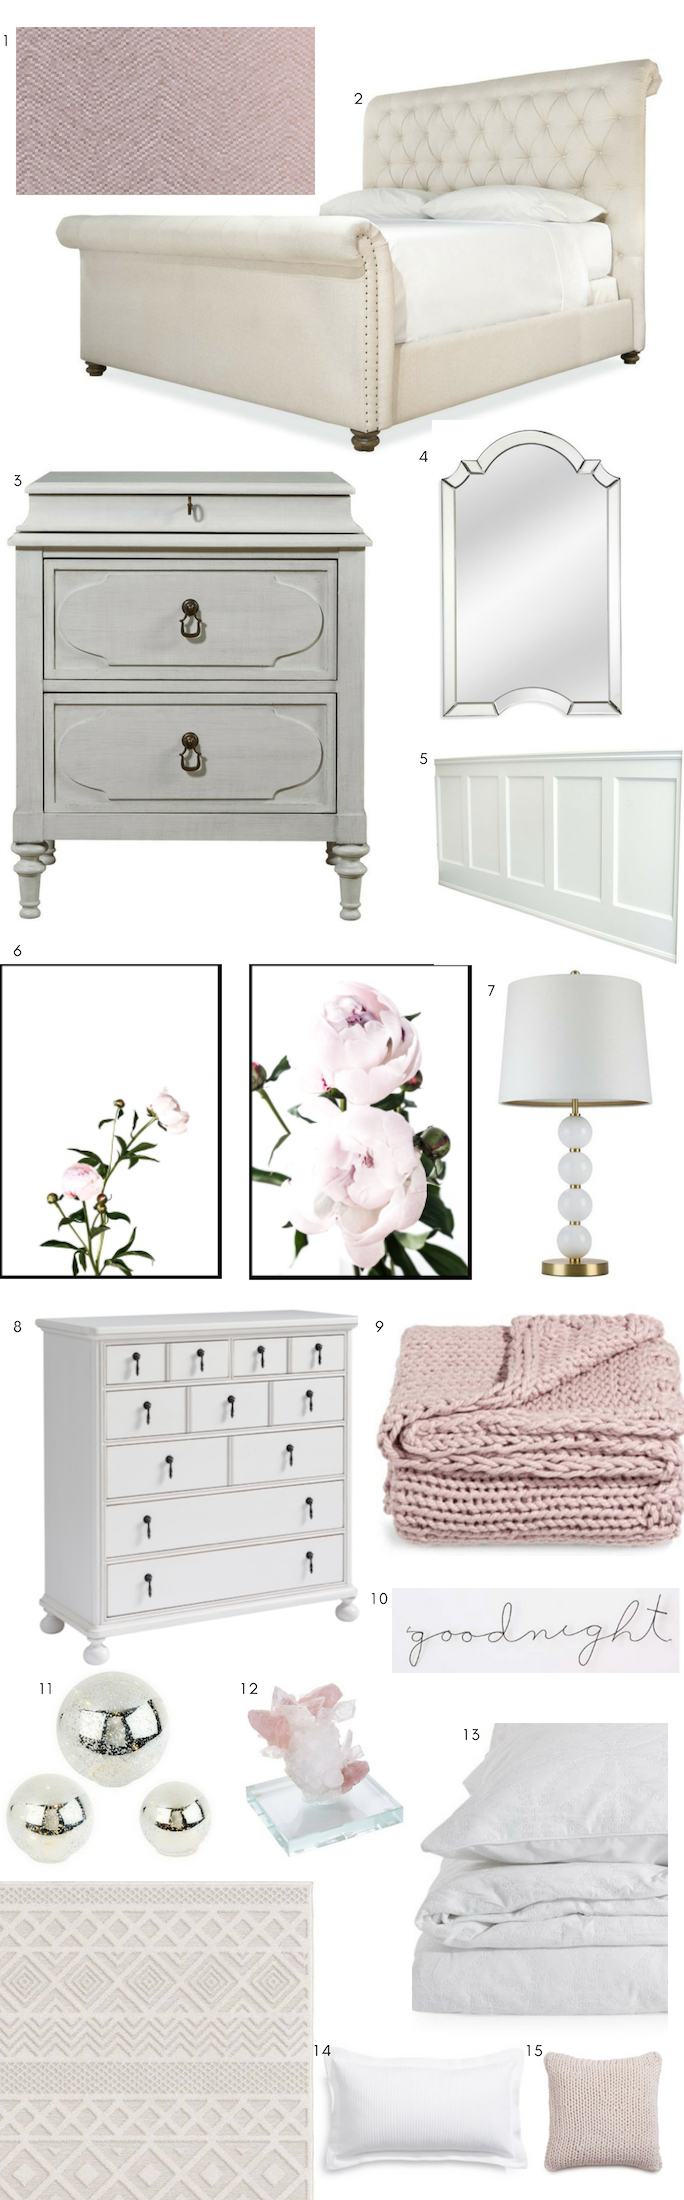 Blush pink and neutral master bedroom ideas. Blush pink and neutral bedroom design board. Bedroom with pink wallpaper and tufted bed. Peony bedroom wall art. Glamorous blush pink and natural bedroom with: ｜1. Graham & Brown wallpaper ｜2. Universal Furniture Boho Chic bed ｜3. Universal Furniture Cancale bedside chest ｜4. Arch top mirror ｜5. Board and batten wainscoting ｜6. Opposite Walls white-framed Lovers and Romance prints ｜7. Stacked glass ball lamp ｜8. Universal Furniture Paula Deen Bungalow Oleander chest ｜9. Glucksteinhome Stella knit throw ｜10. Goodnight cursive sign ｜11. Lit mercury glass globes ｜12. Decorative agate ｜13. Glucksteinhome Classic White 3-piece duvet set ｜14. Glucksteinhome Classic White cushion ｜15. Glucksteinhome Stella knit cushion ｜